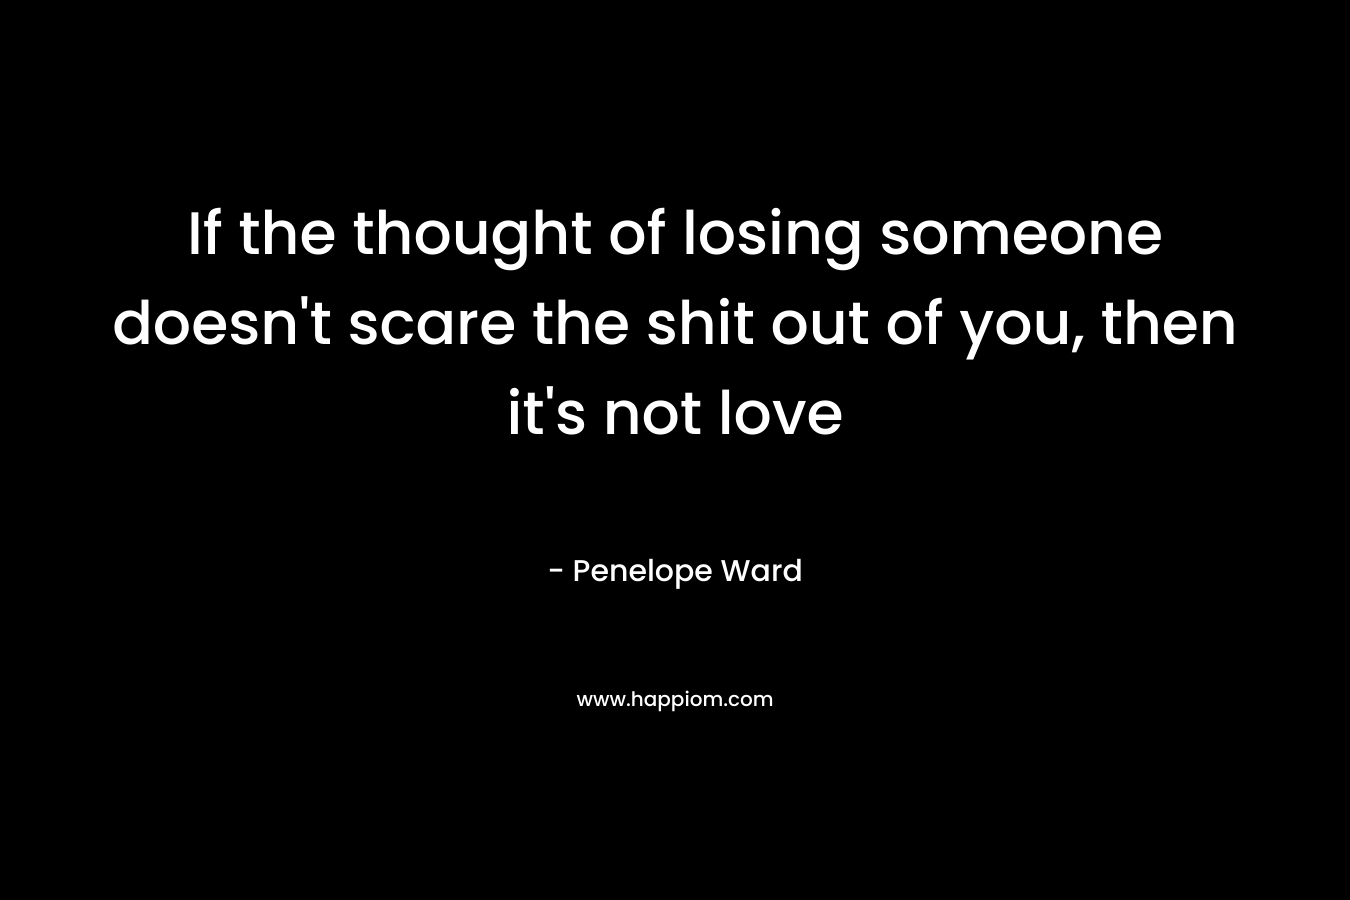 If the thought of losing someone doesn't scare the shit out of you, then it's not love